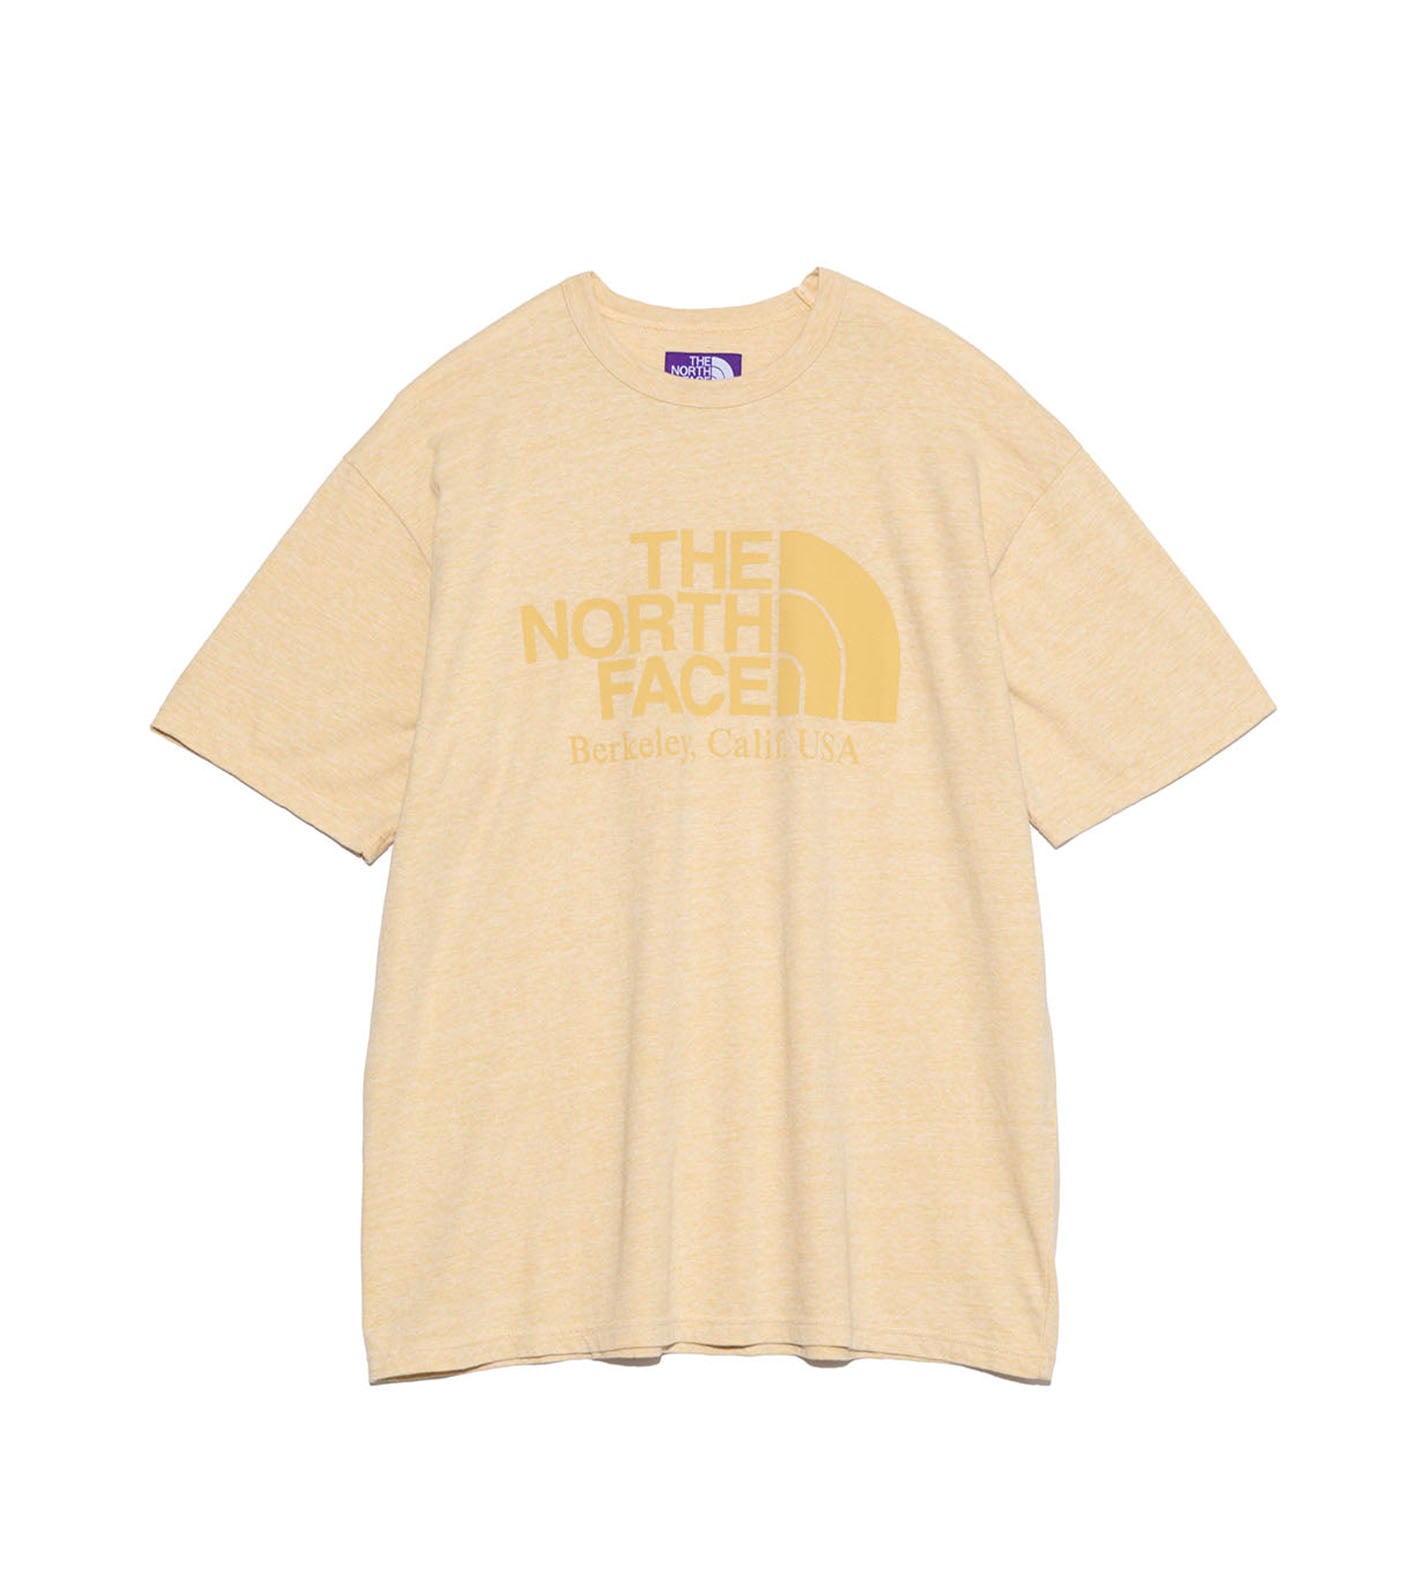 THE NORTH FACE PURPLE LABEL Cotton Rayon Field Graphic Tee